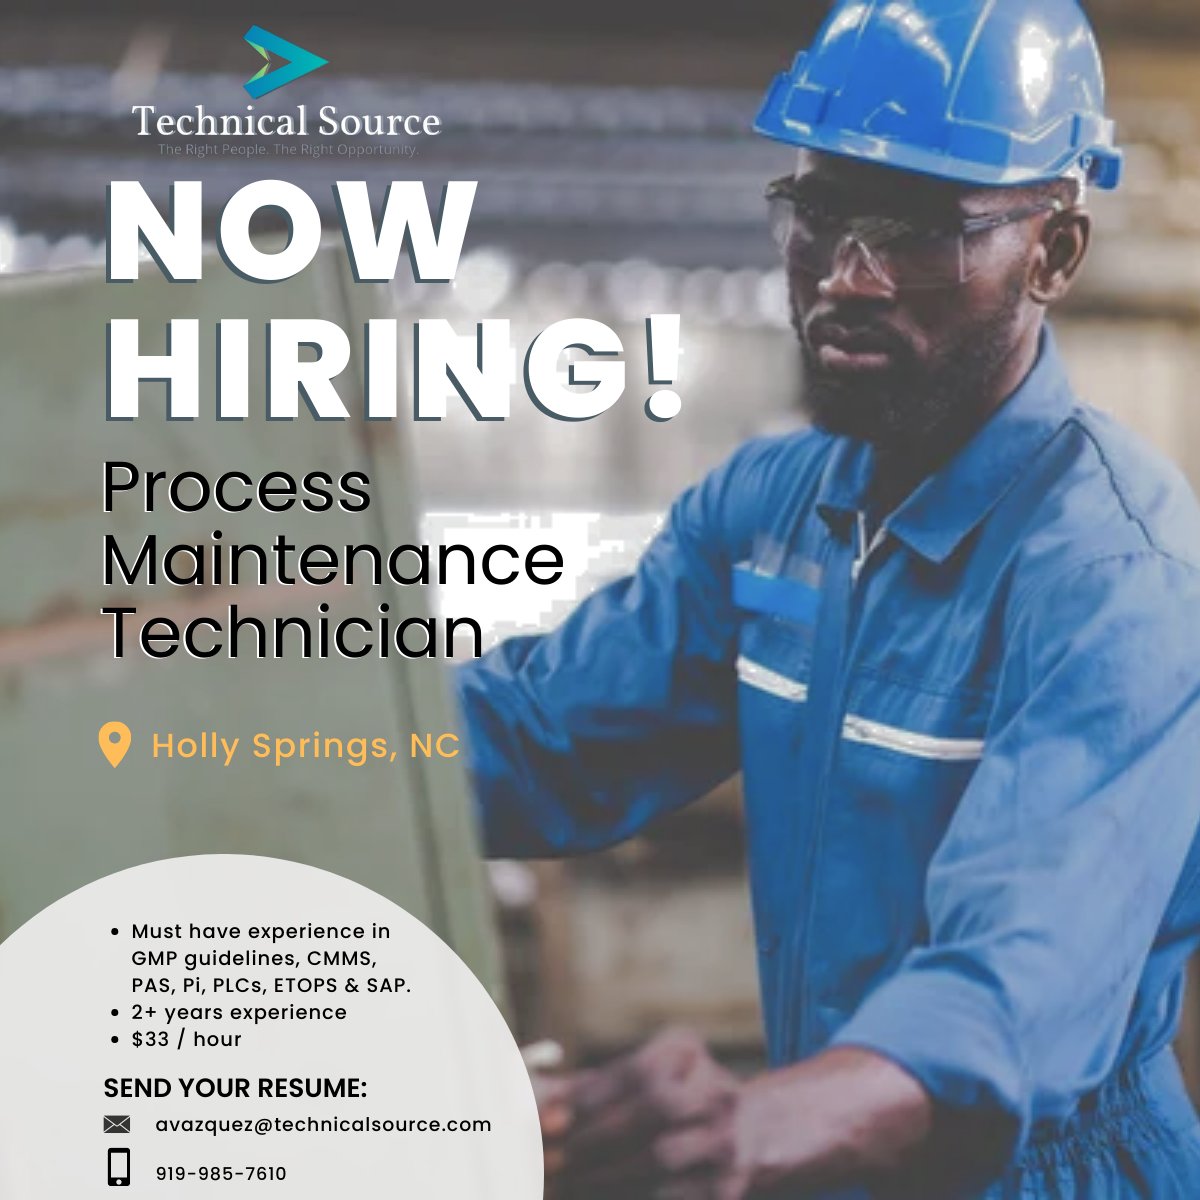 🚨 JOB ALERT 🚨 Seeking experienced Process Maintenance Technician for innovative pharma manufacturing co. in #hollyspringsnc . Must have experience in GMP guidelines, CMMS, PAS, Pi, PLCs, ETOPS & SAP. 💰 $33/hour for night shift work. 2+year exp. #Pharma #MaintenanceTechnician